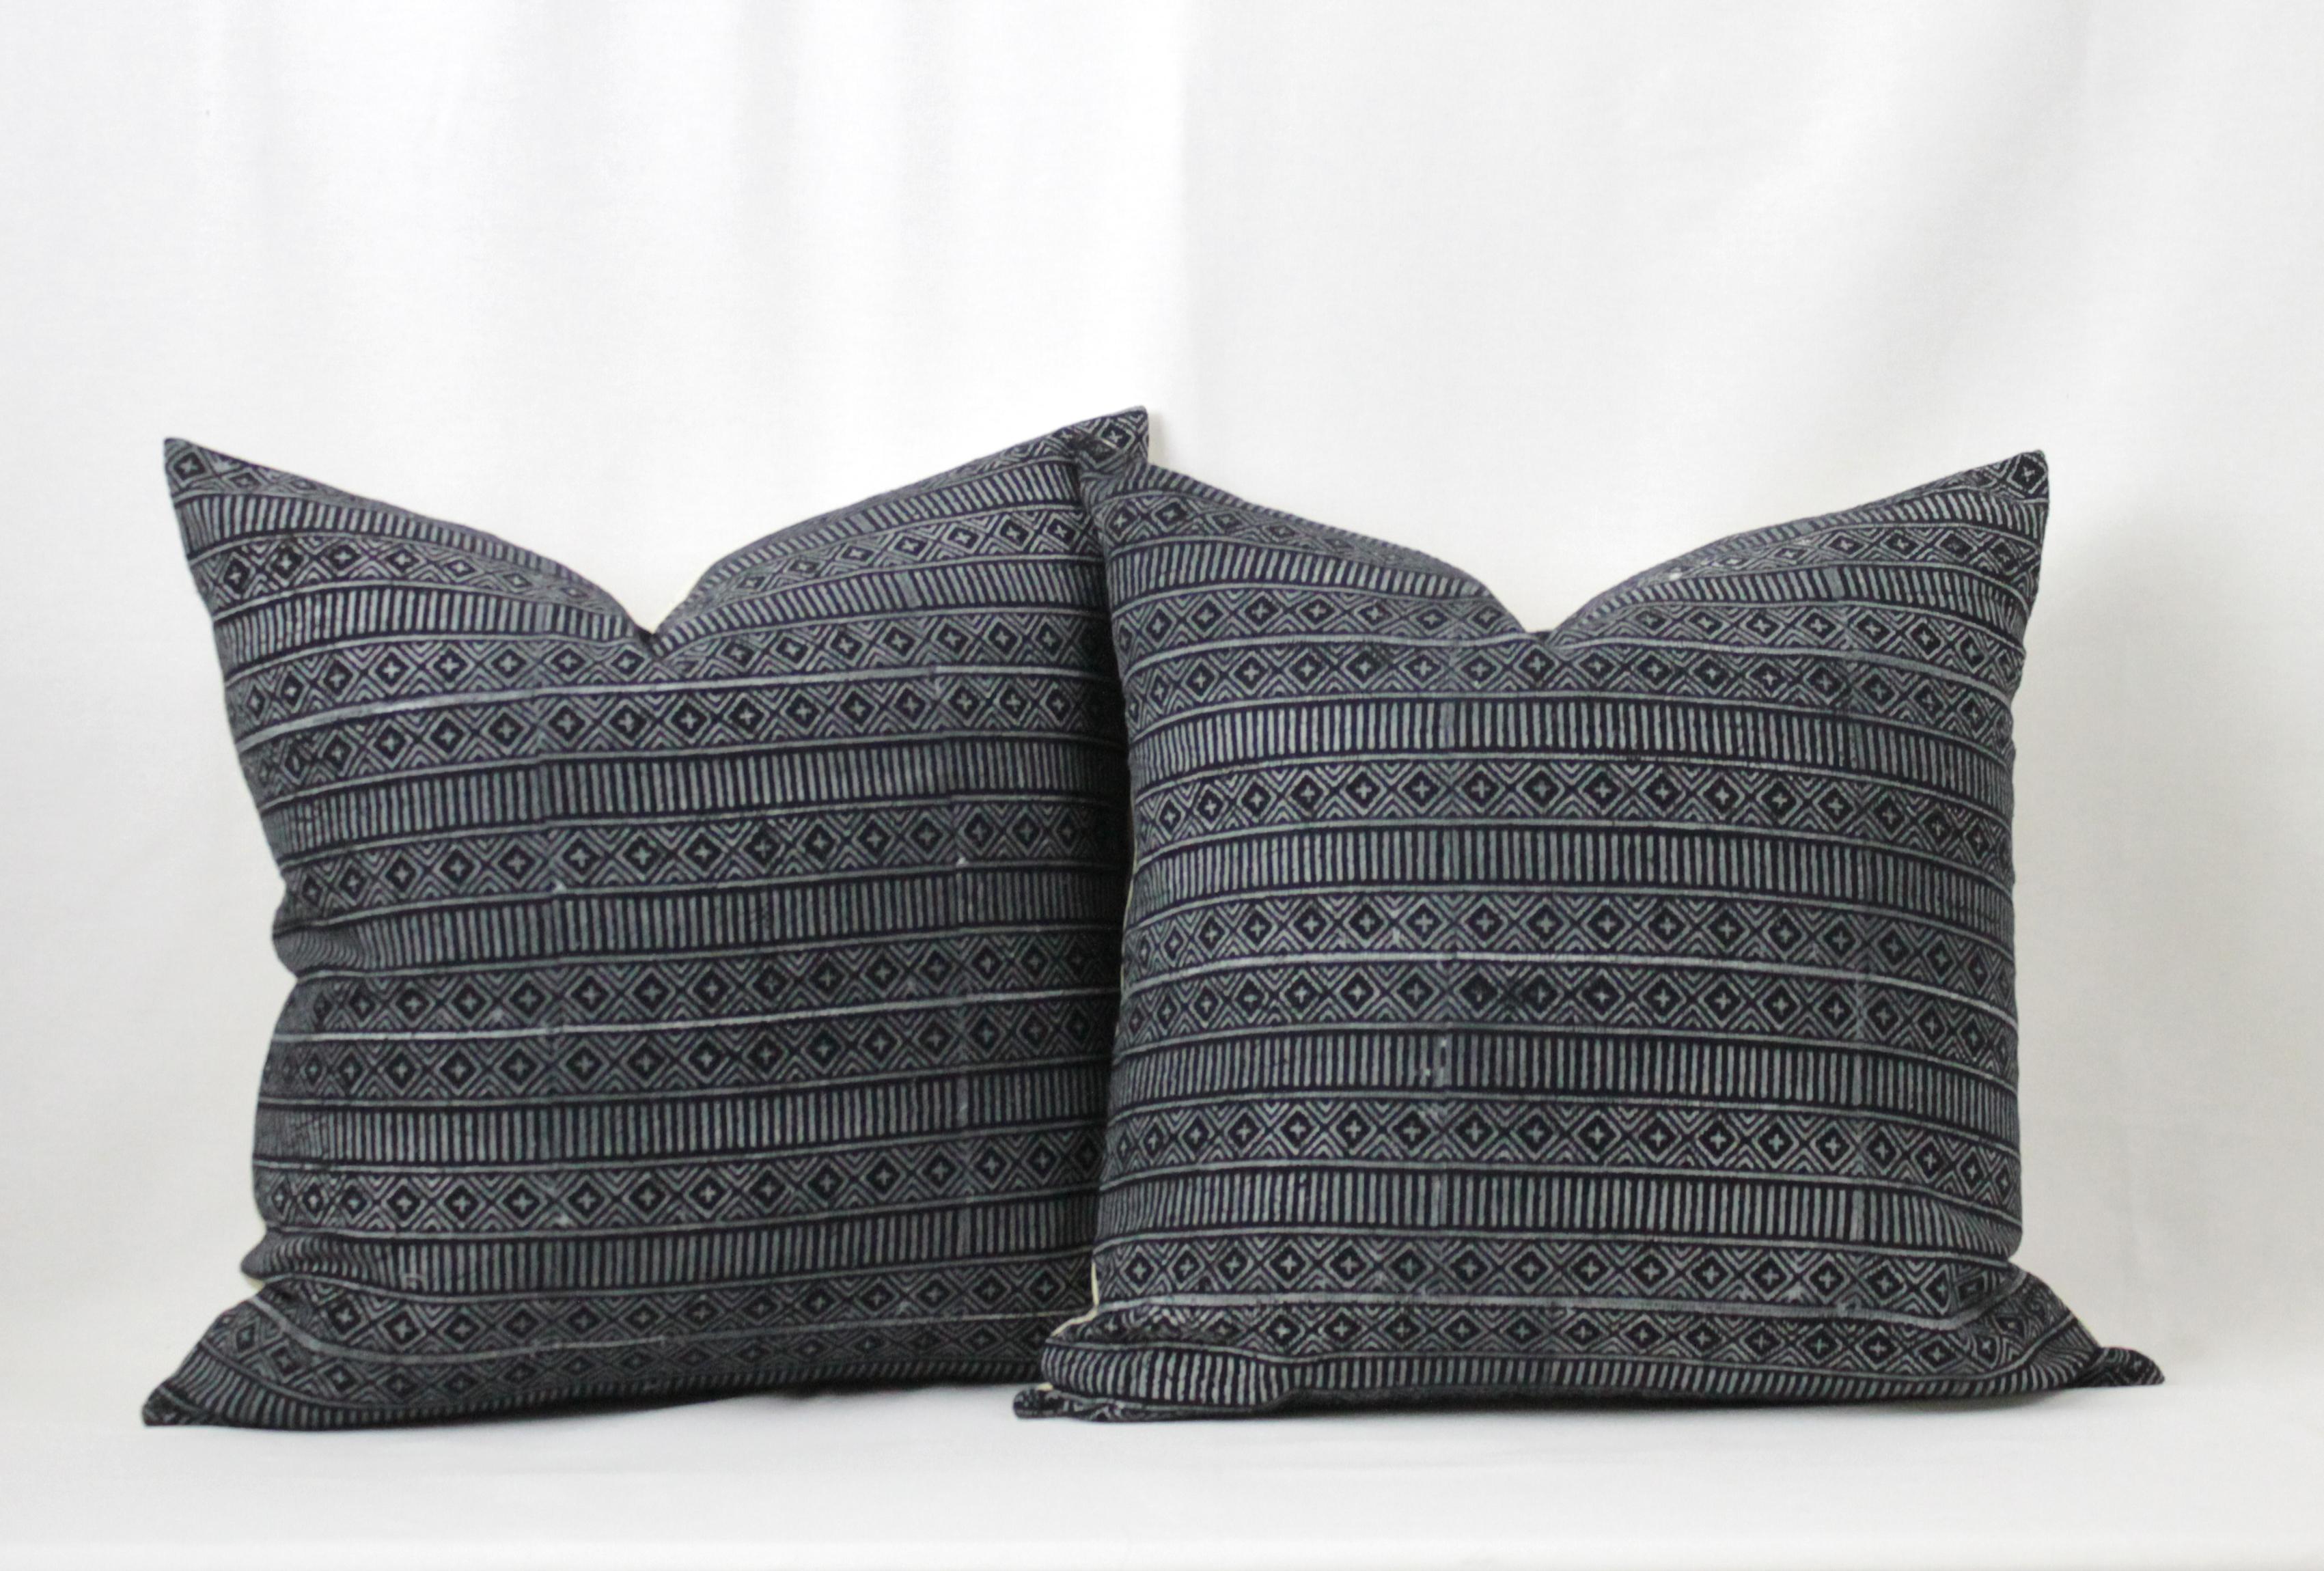 Black and white geometric reproduction style pillow, with zipper closure. Back is in linen, finished with overlocked edges. Main colors are black and white. Does not include insert. Measures 21